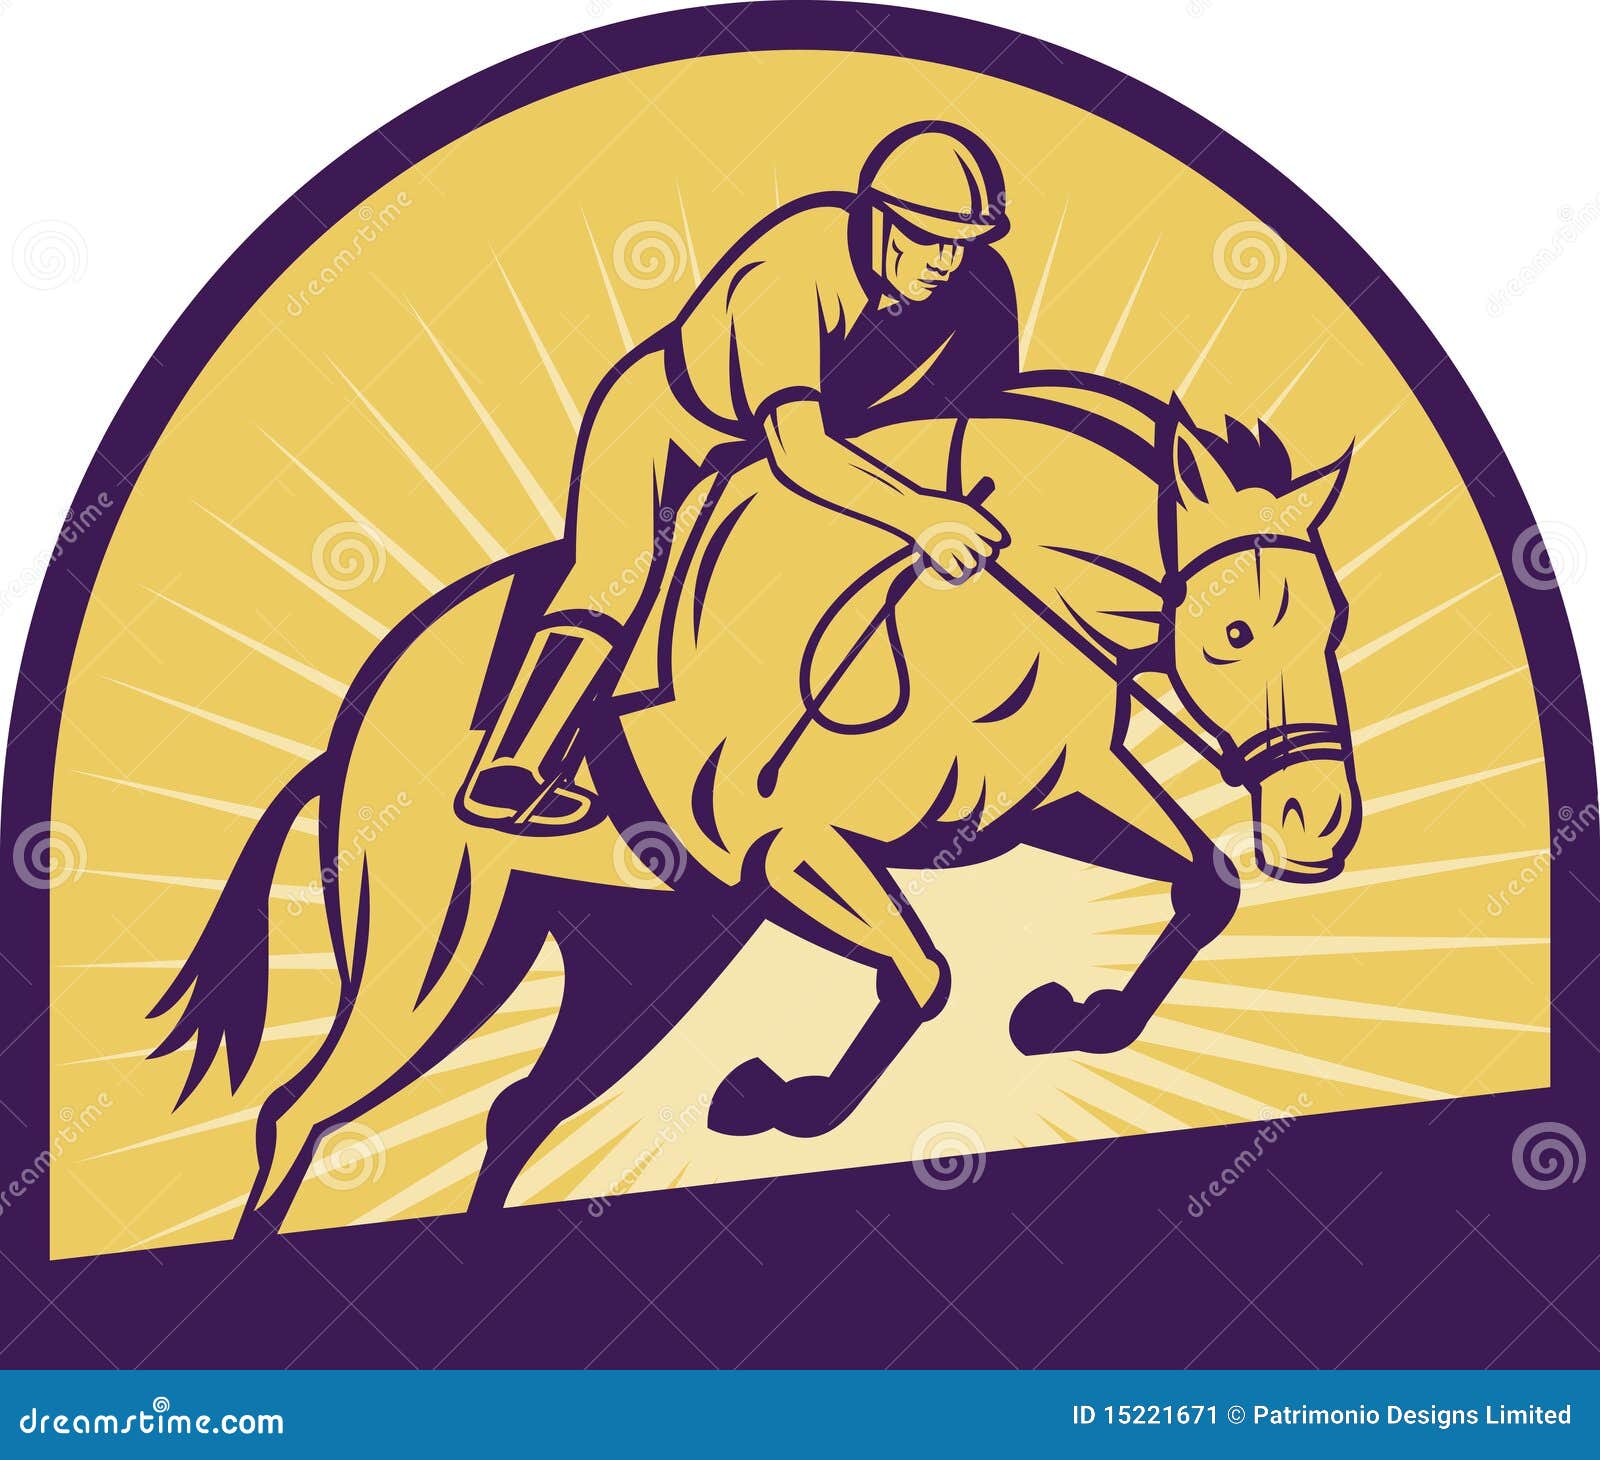 show jumping clipart - photo #31